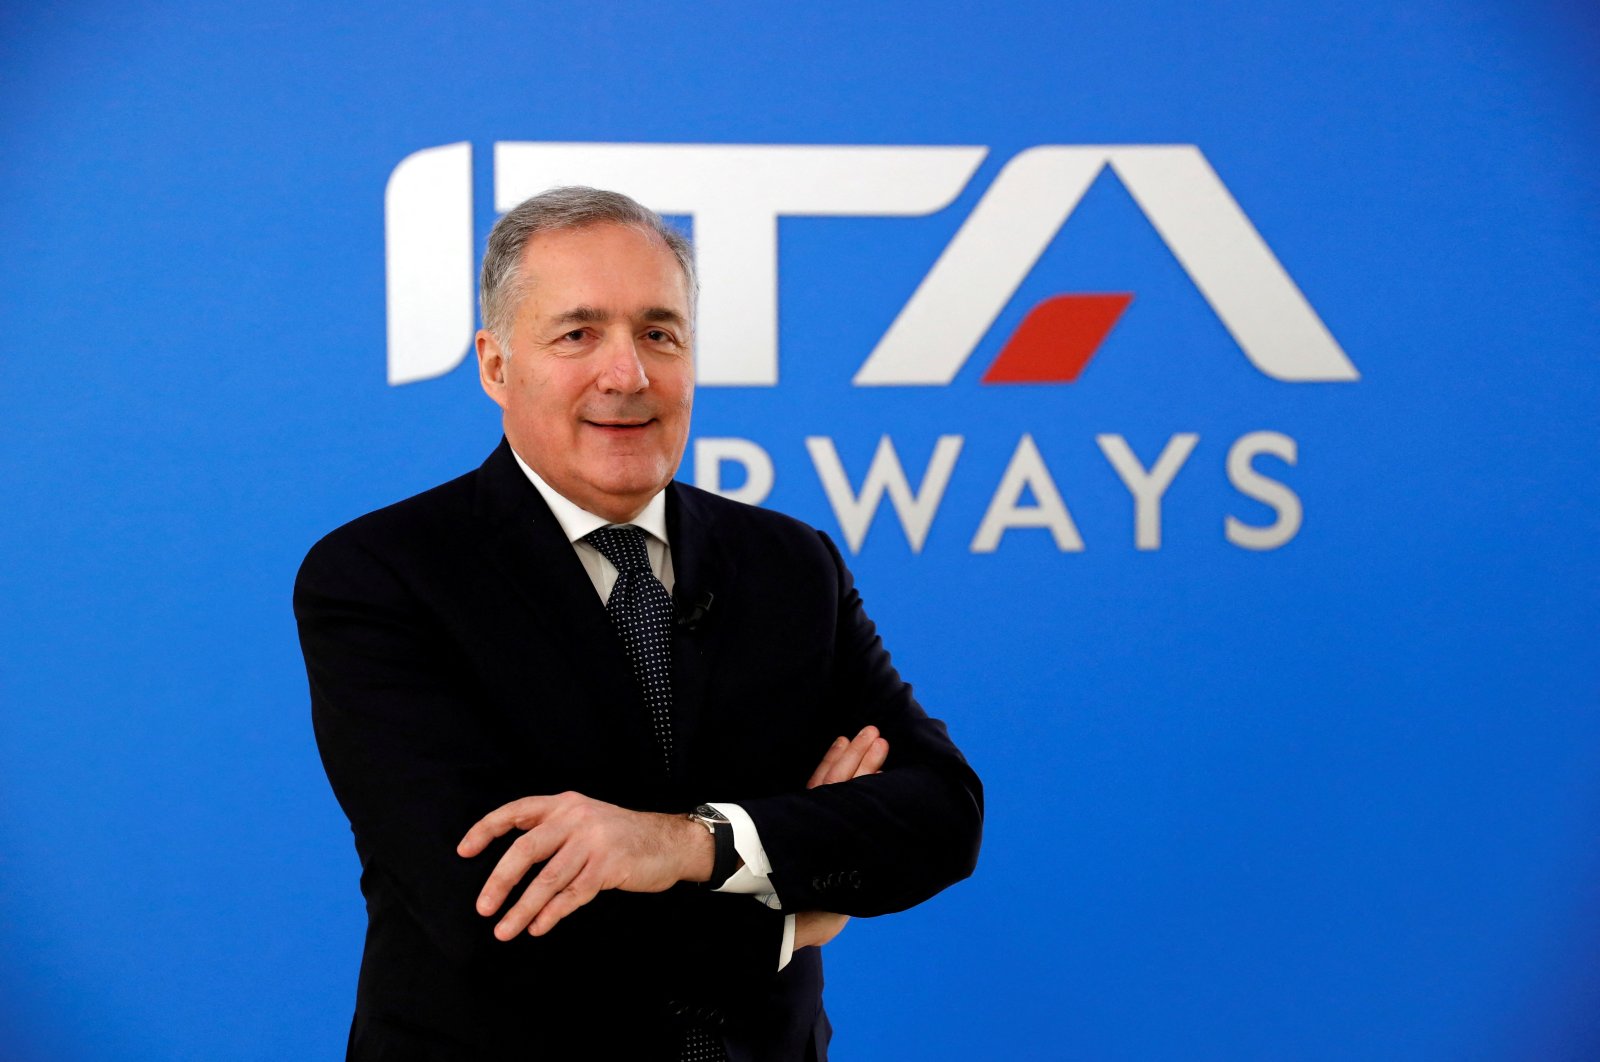 Alfredo Altavilla, former chairperson of ITA, poses for a photo after holding a news conference at Fiumicino airport, Rome, Italy, March 1, 2022. (Reuters Photo)